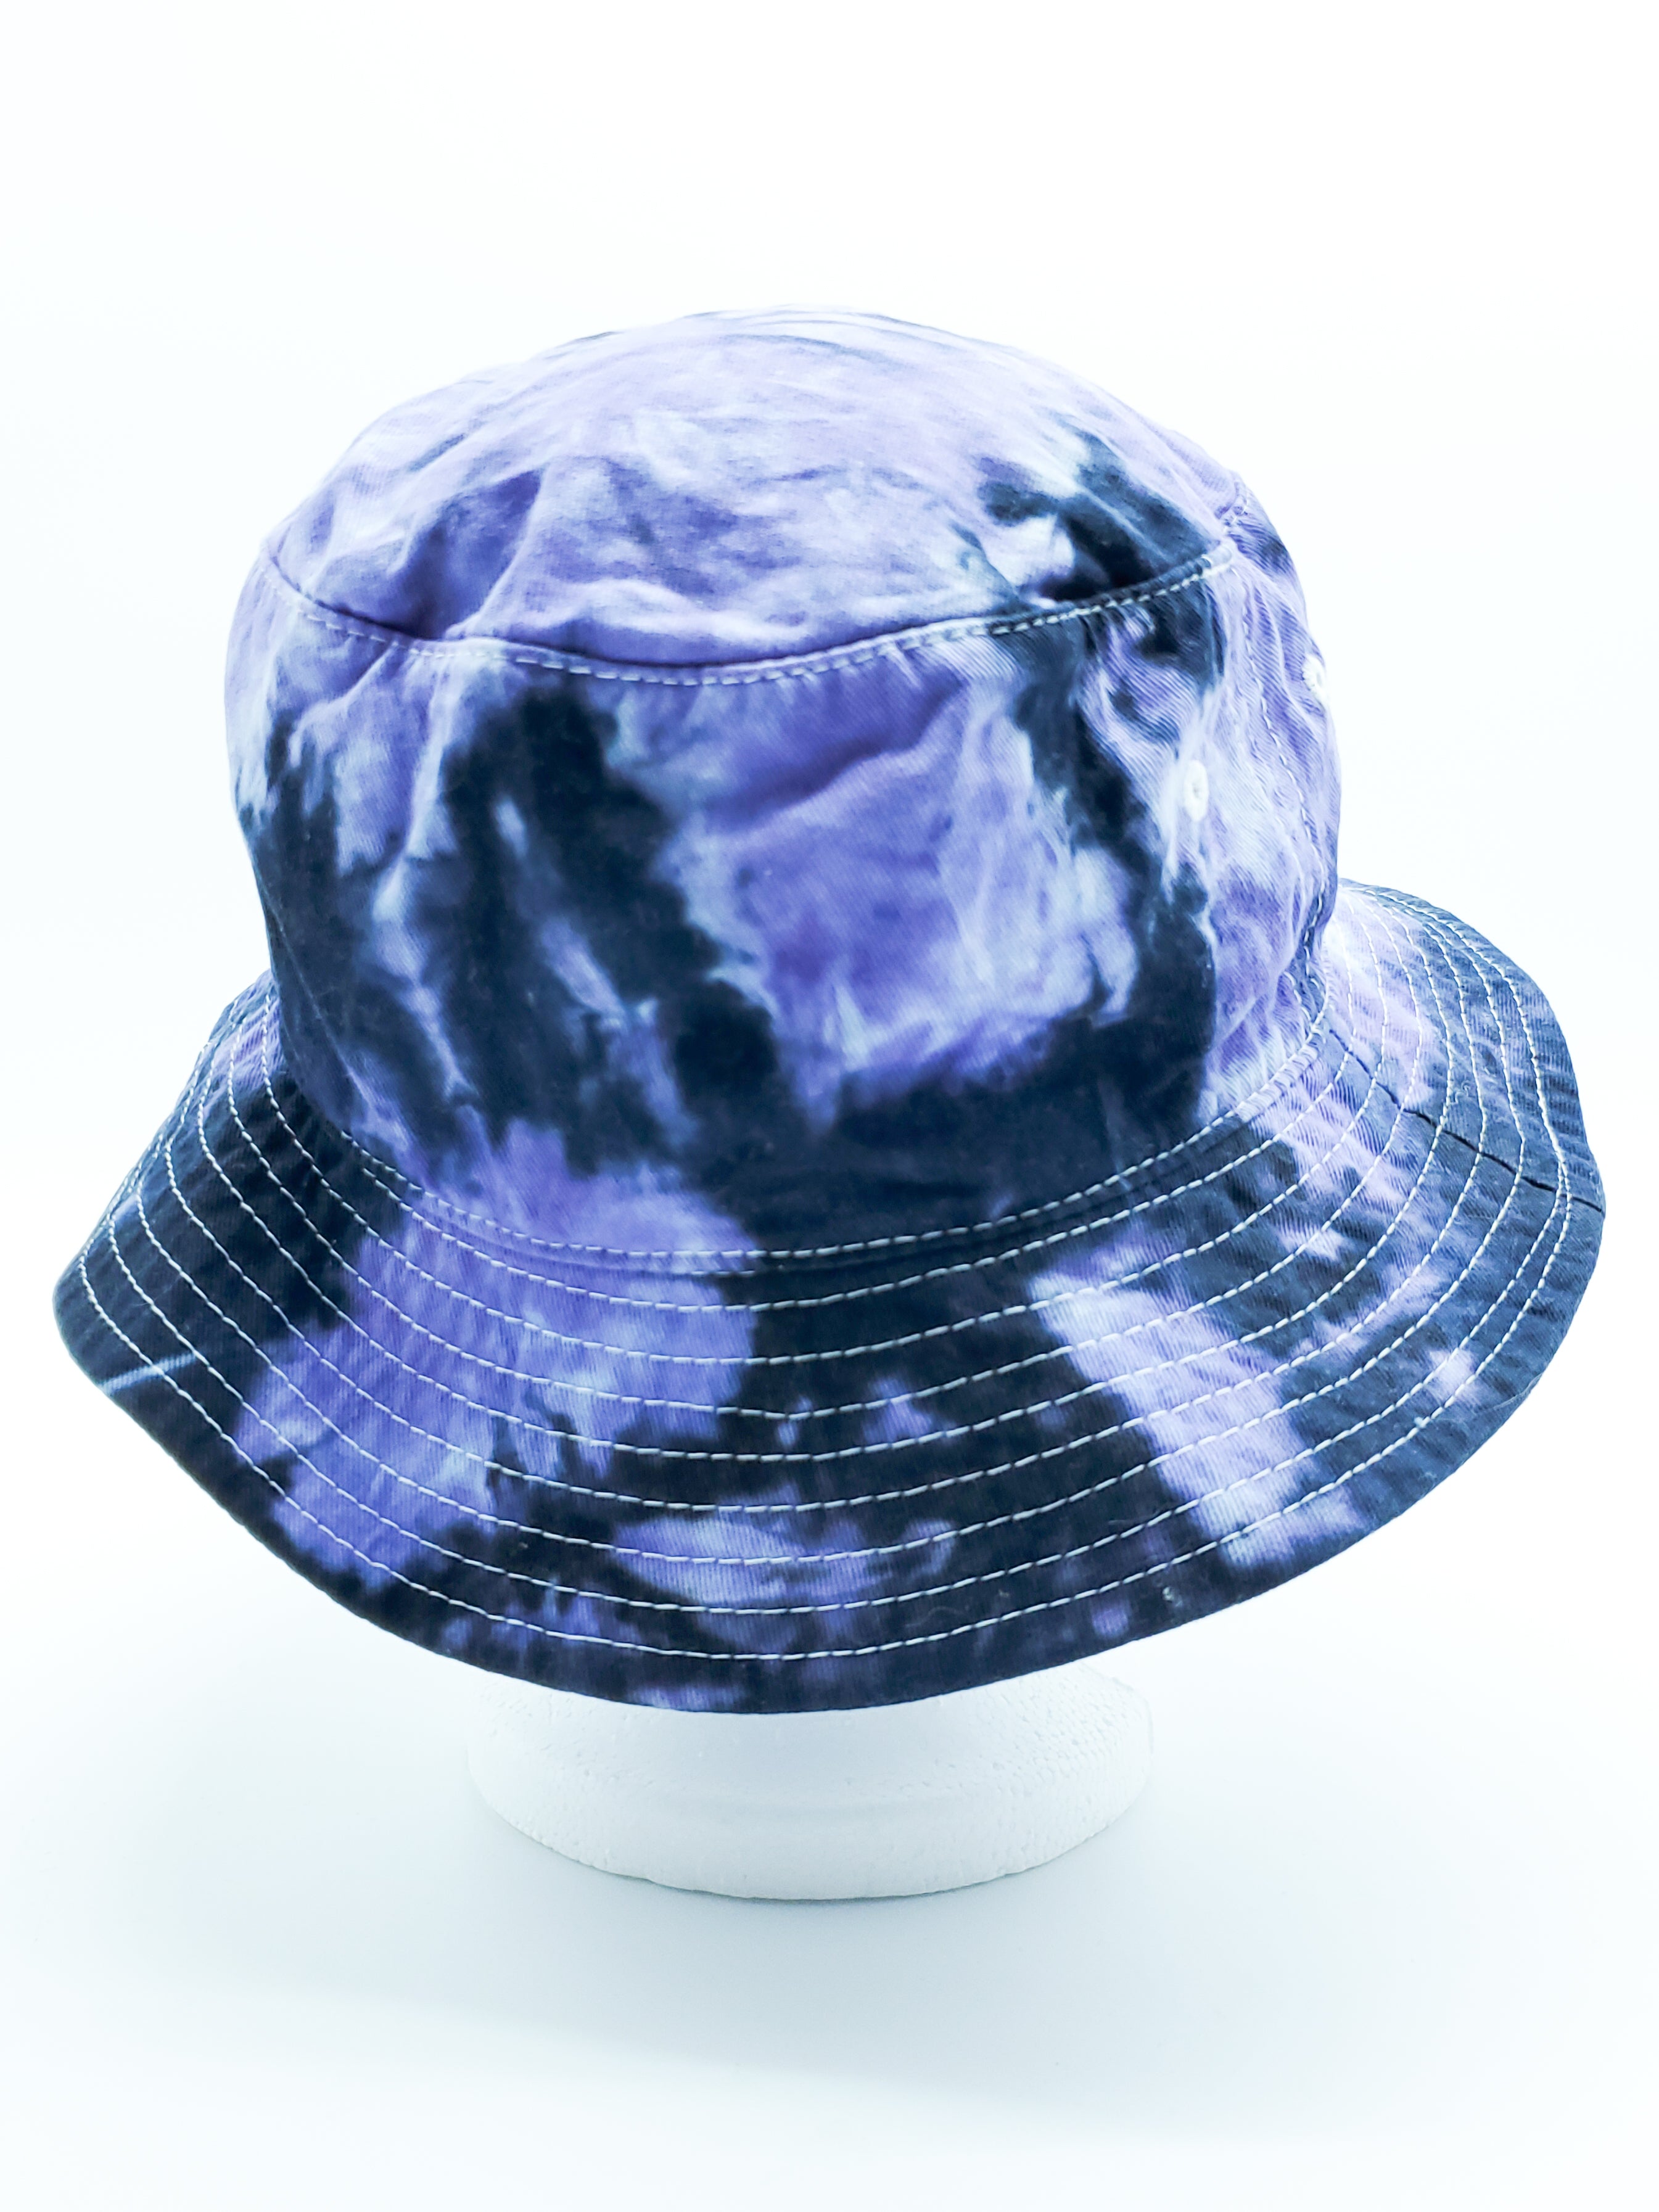 Lavender and Black Tie Dye Bucket Hat (Adult, O/S) - The Caffeinated Raven